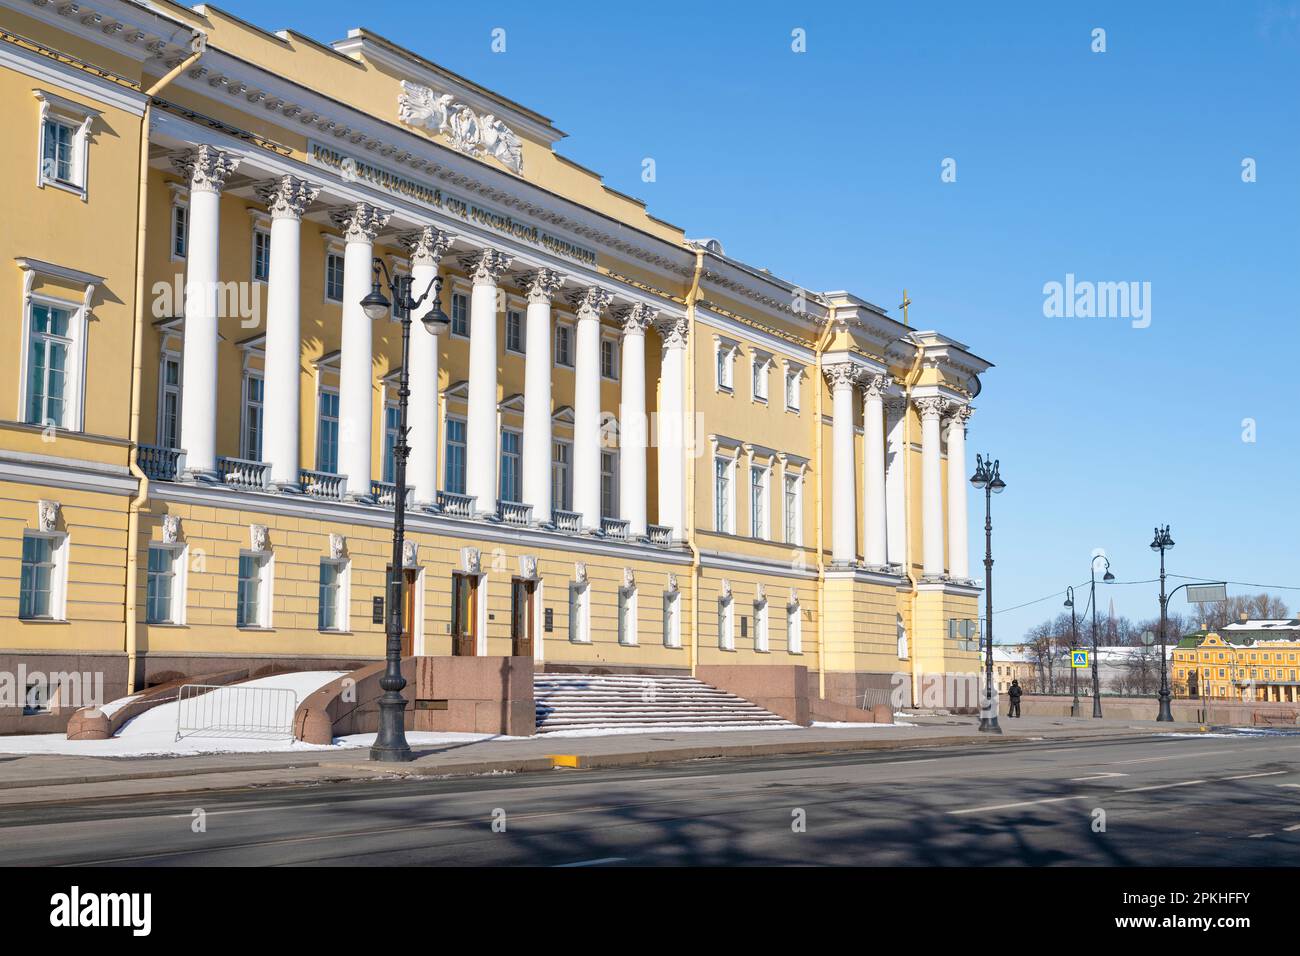 SAINT PETERSBURG, RUSSIA - APRIL 02, 2023: The building of the Constitutional Court of the Russian Federation on a sunny April day Stock Photo